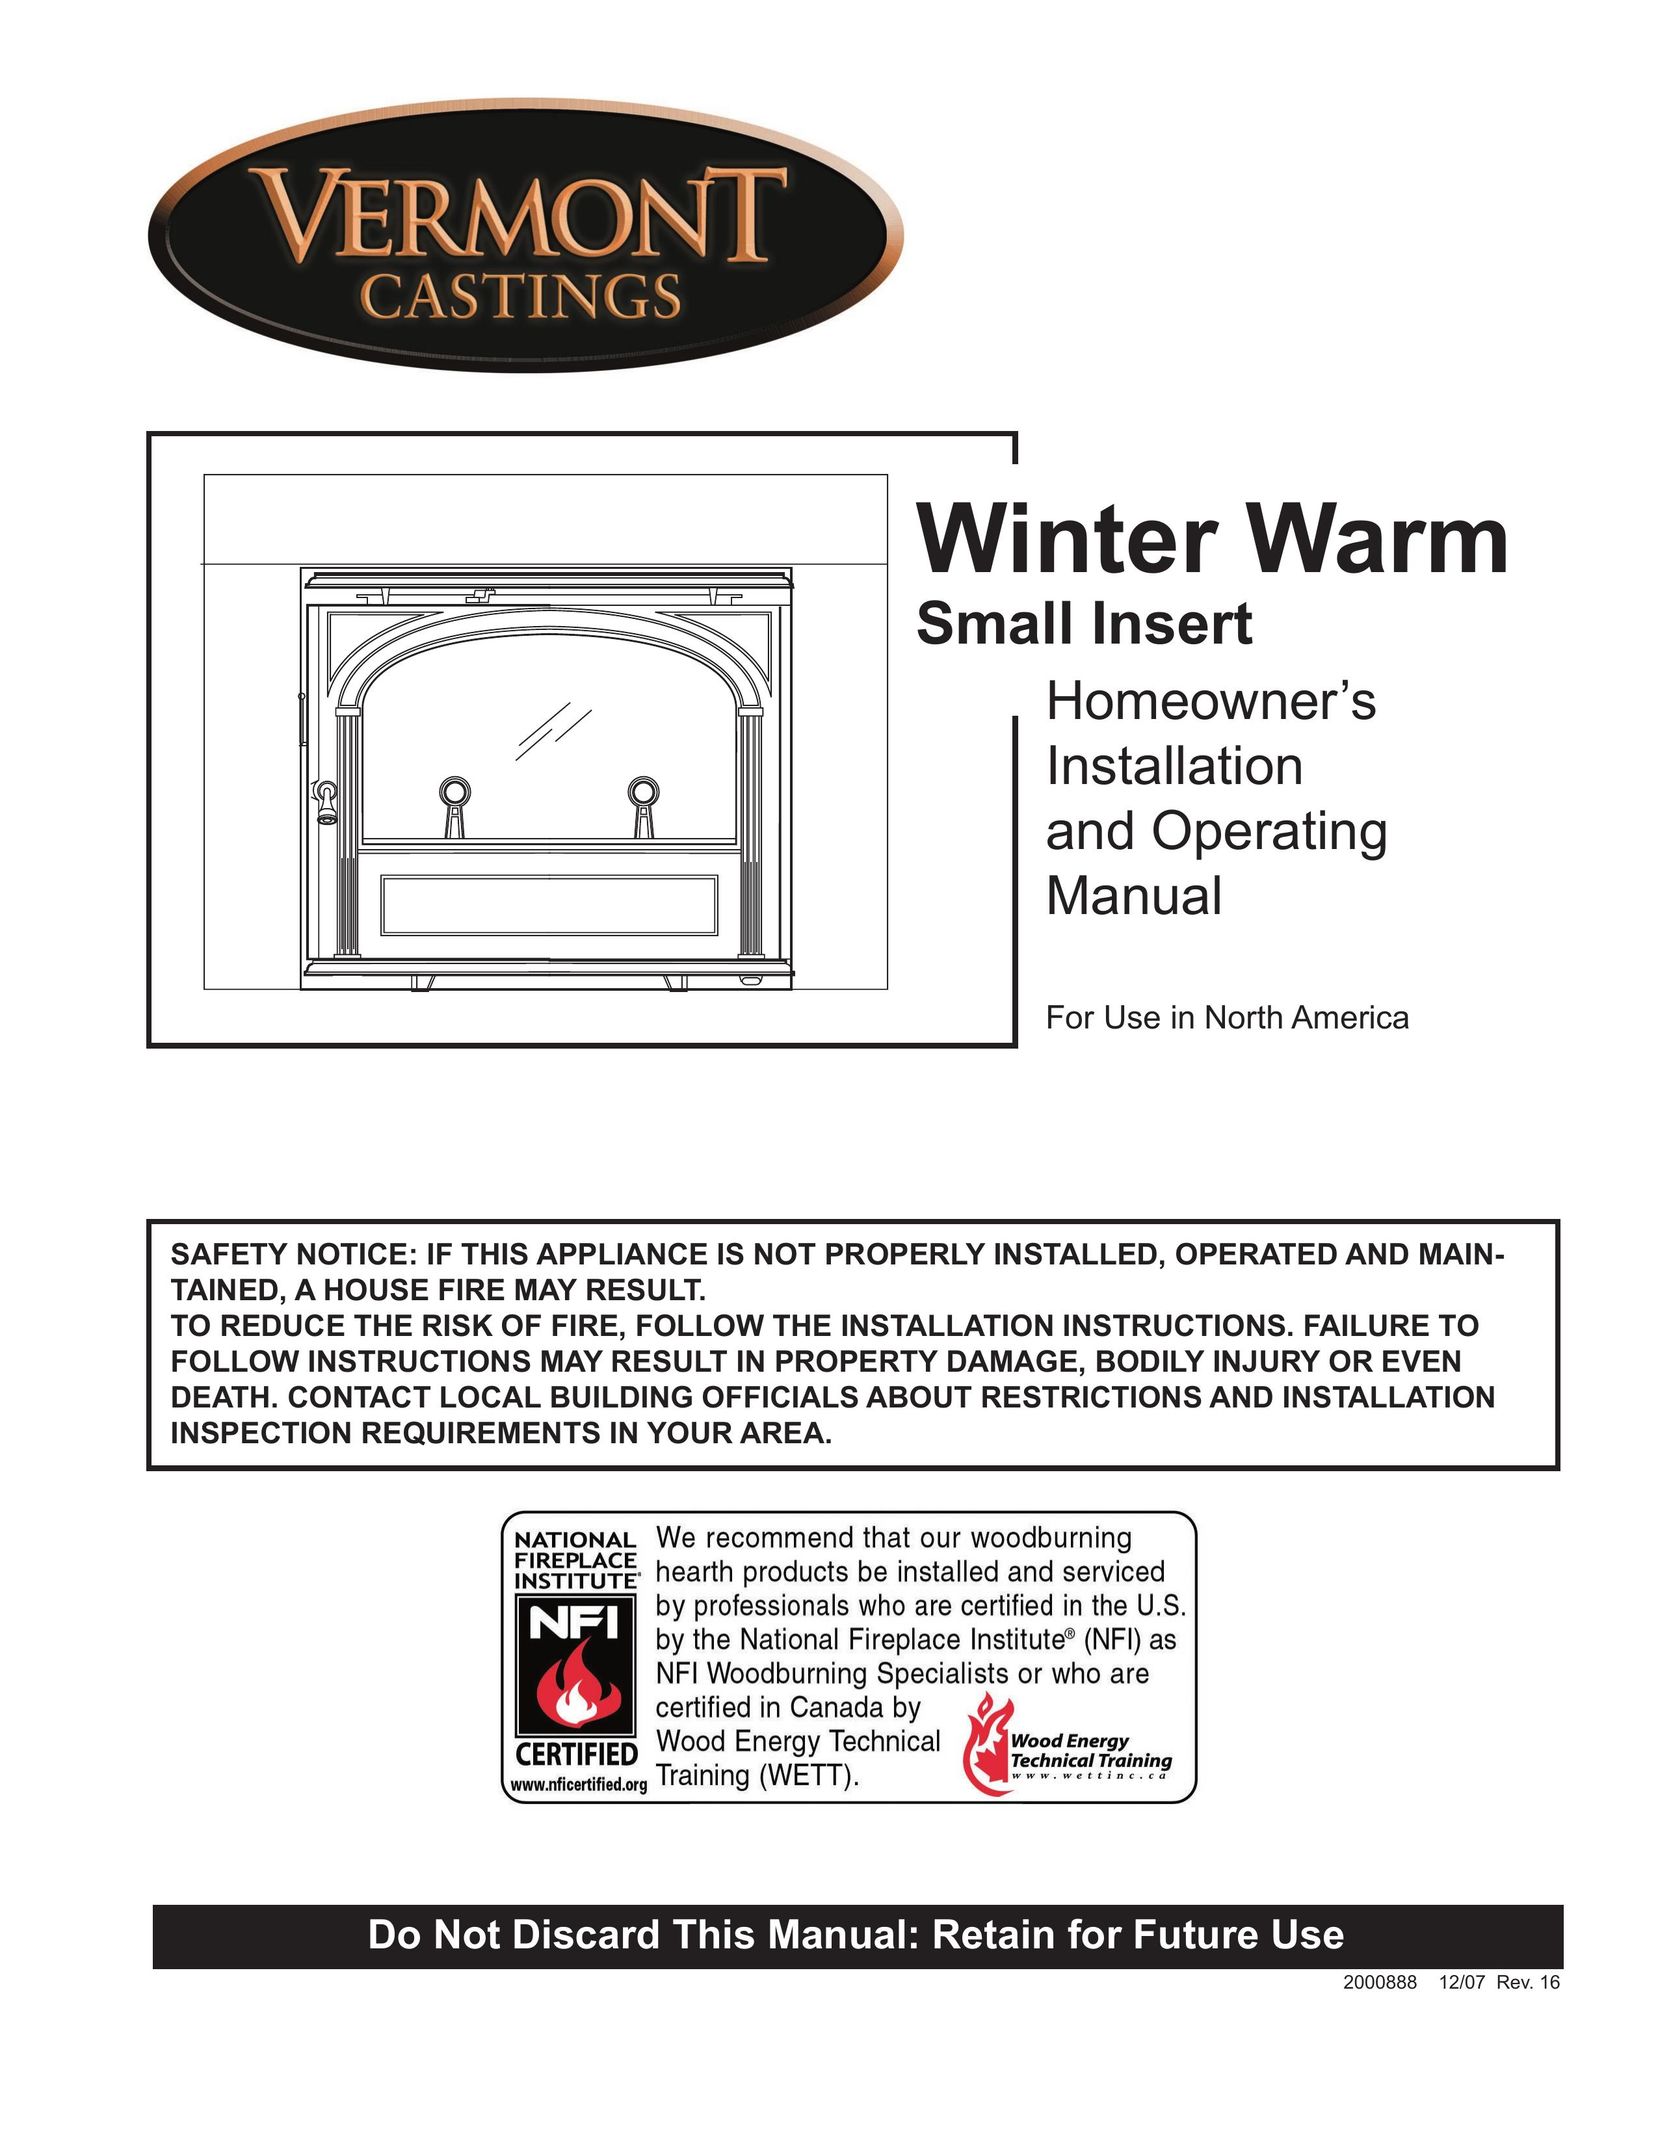 CFM Corporation Winter Warm - Small Insert Indoor Fireplace User Manual